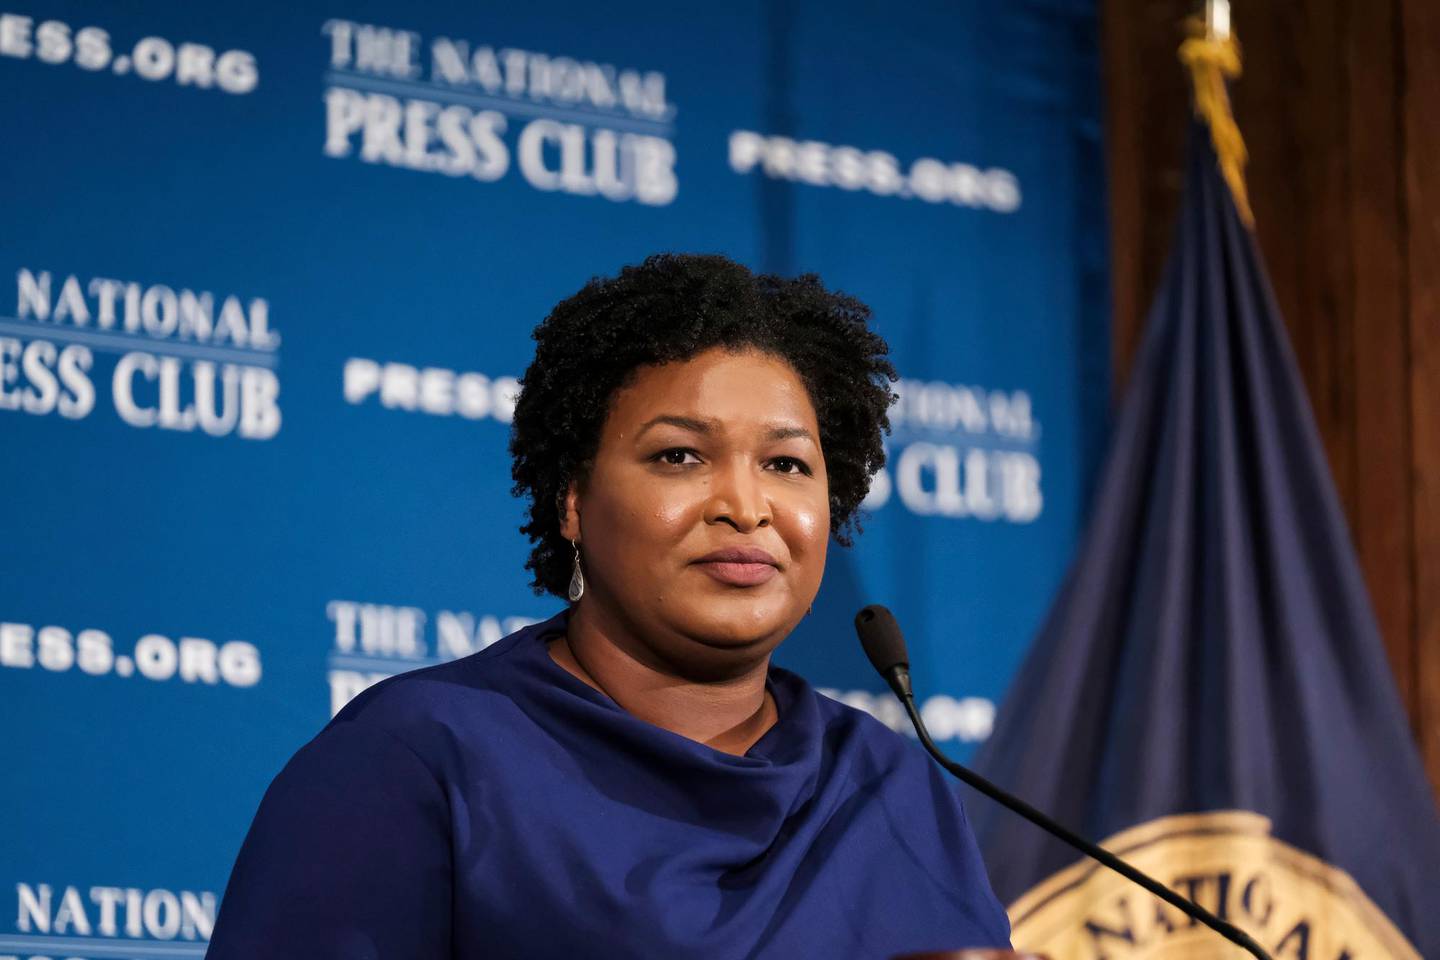 FILE - In this Nov. 15, 2019, file photo former Georgia House Democratic Leader Stacey Abrams, speaks at the National Press Club in Washington. Presumptive Democratic presidential nominee Joe Biden has already narrowed the field by saying he will pick a woman. In addition to Sen. Kamala Harris, Sen. Amy Klobuchar and Michigan Gov. Gretchen Whitmer, other names that have been part of the speculation are Sen. Elizabeth Warren of Massachusetts and Abrams. (AP Photo/Michael A. McCoy, File)